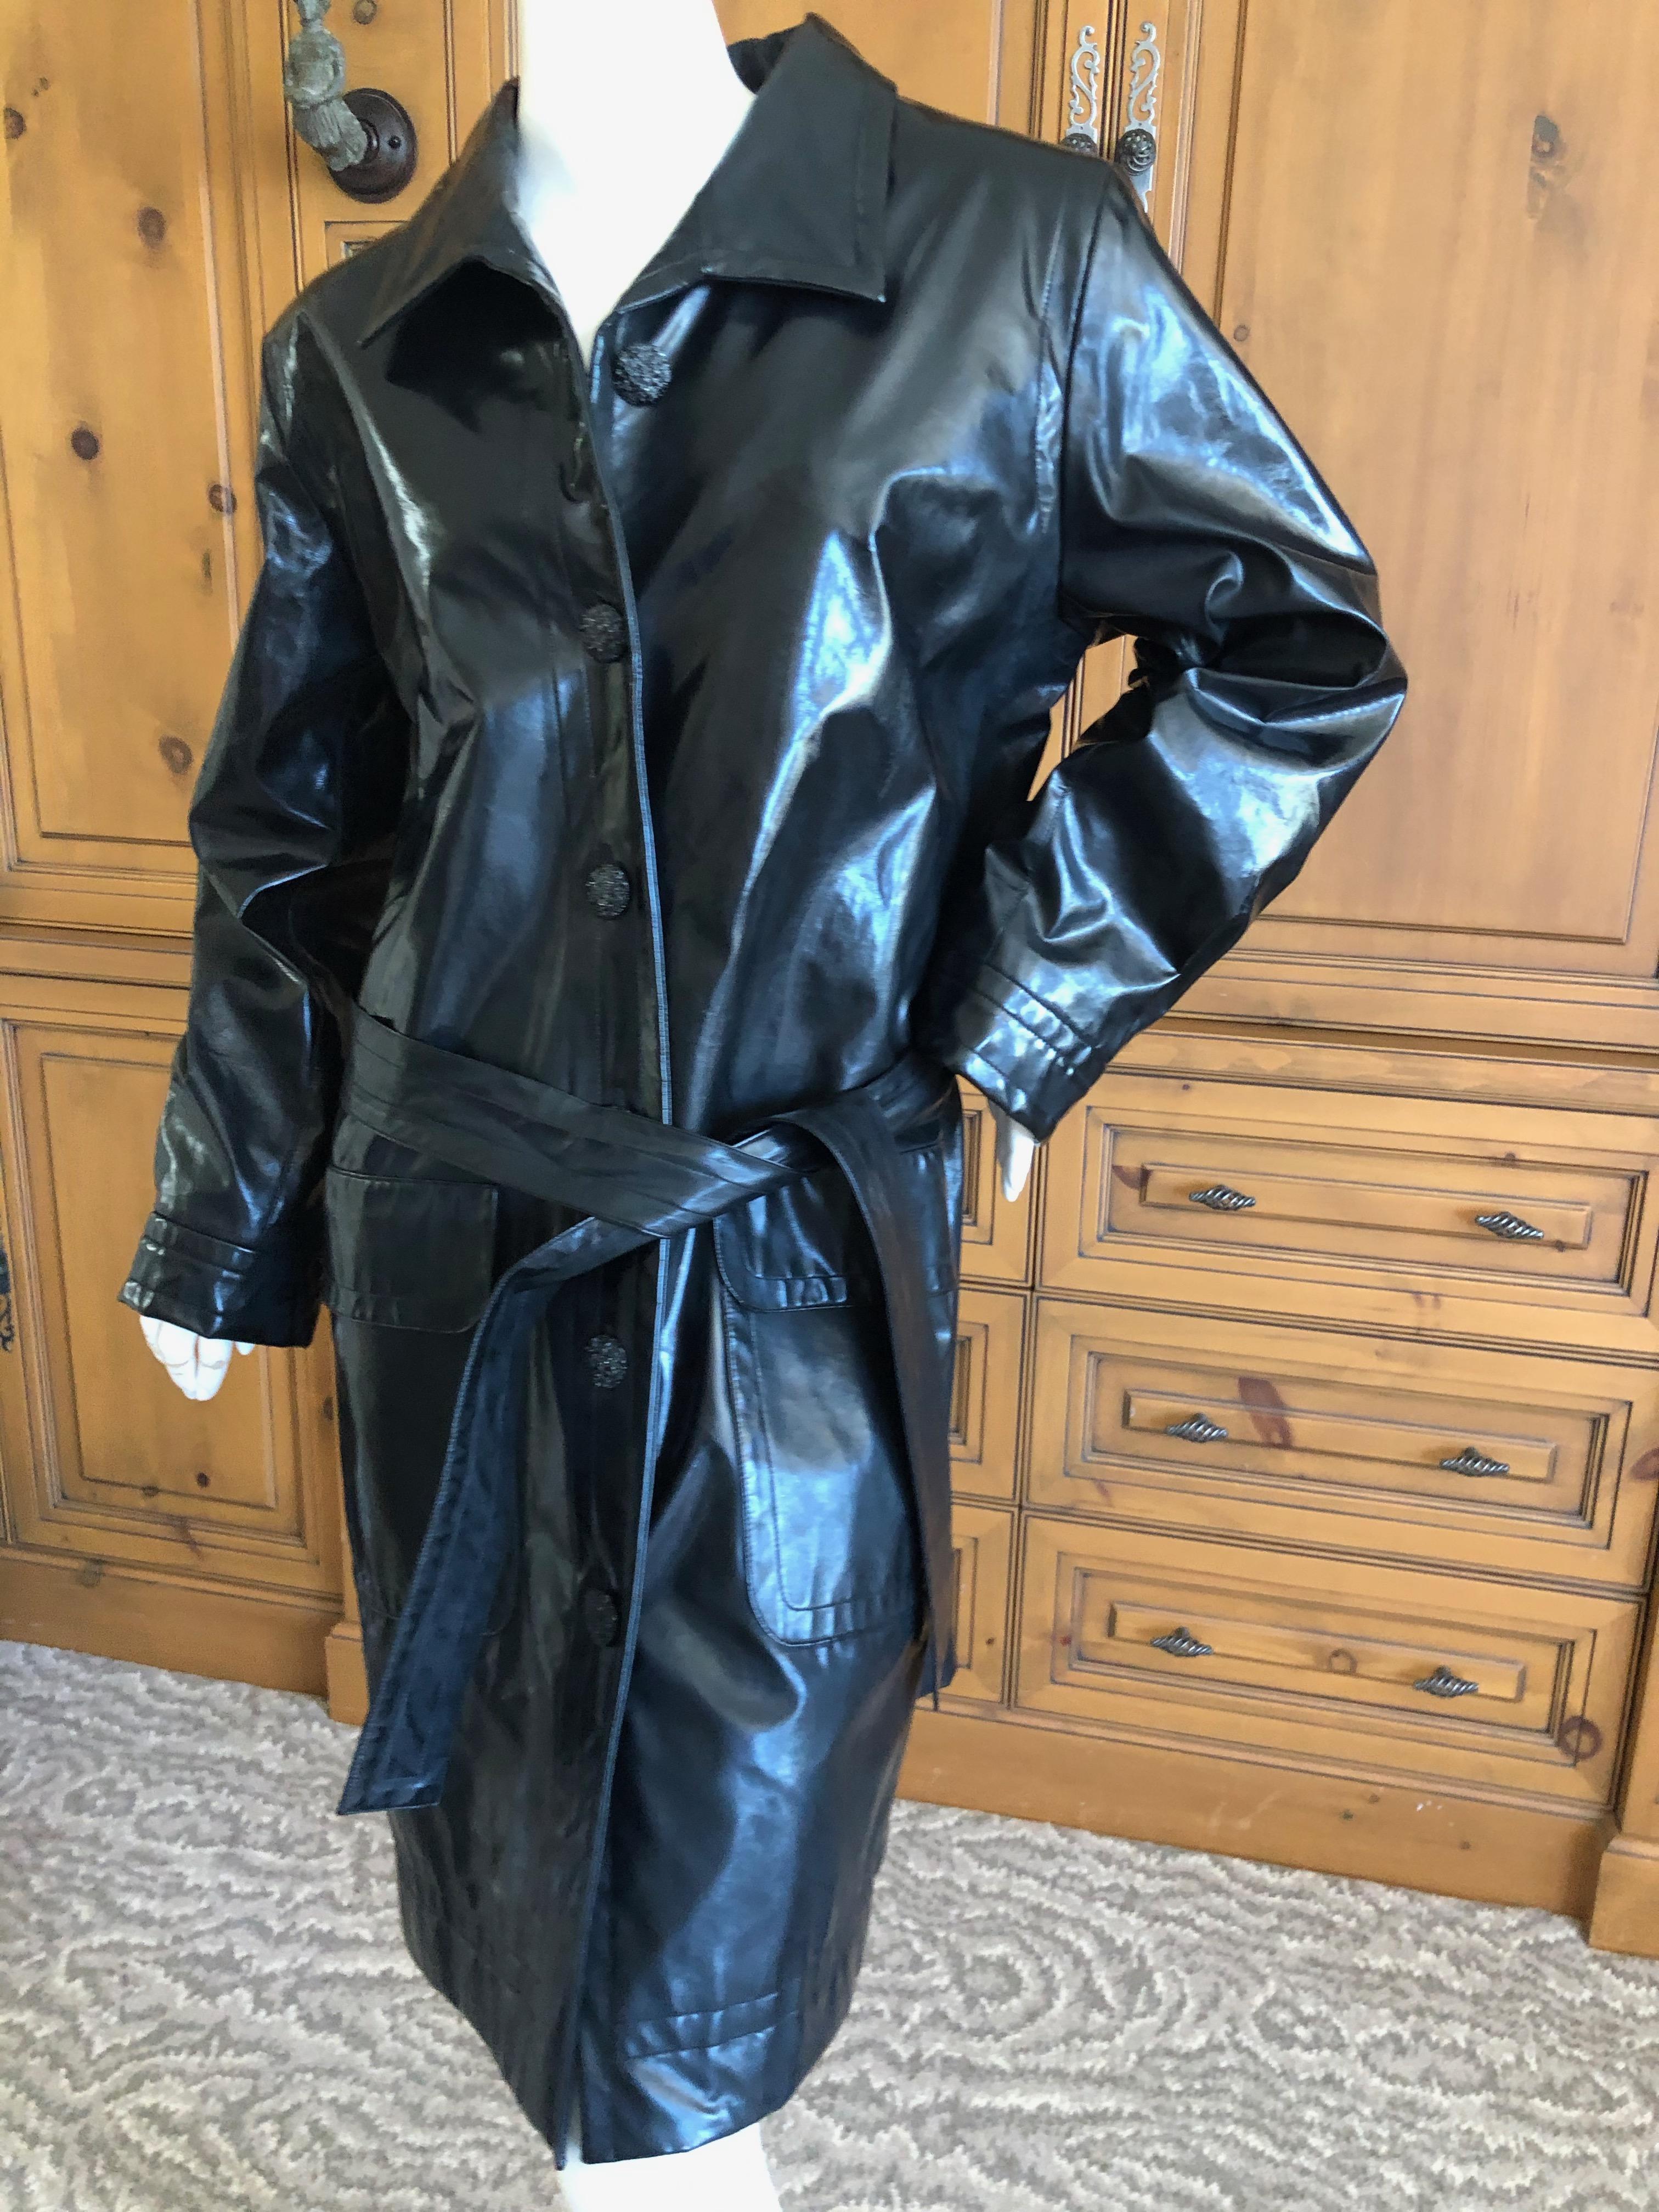 Yves Saint Laurent Rive Gauche Vintage Black Polished Cotton Trench Coat with Belt .
This looks like patent leather but is polished cotton so cool.
Sz 42
Bust 44